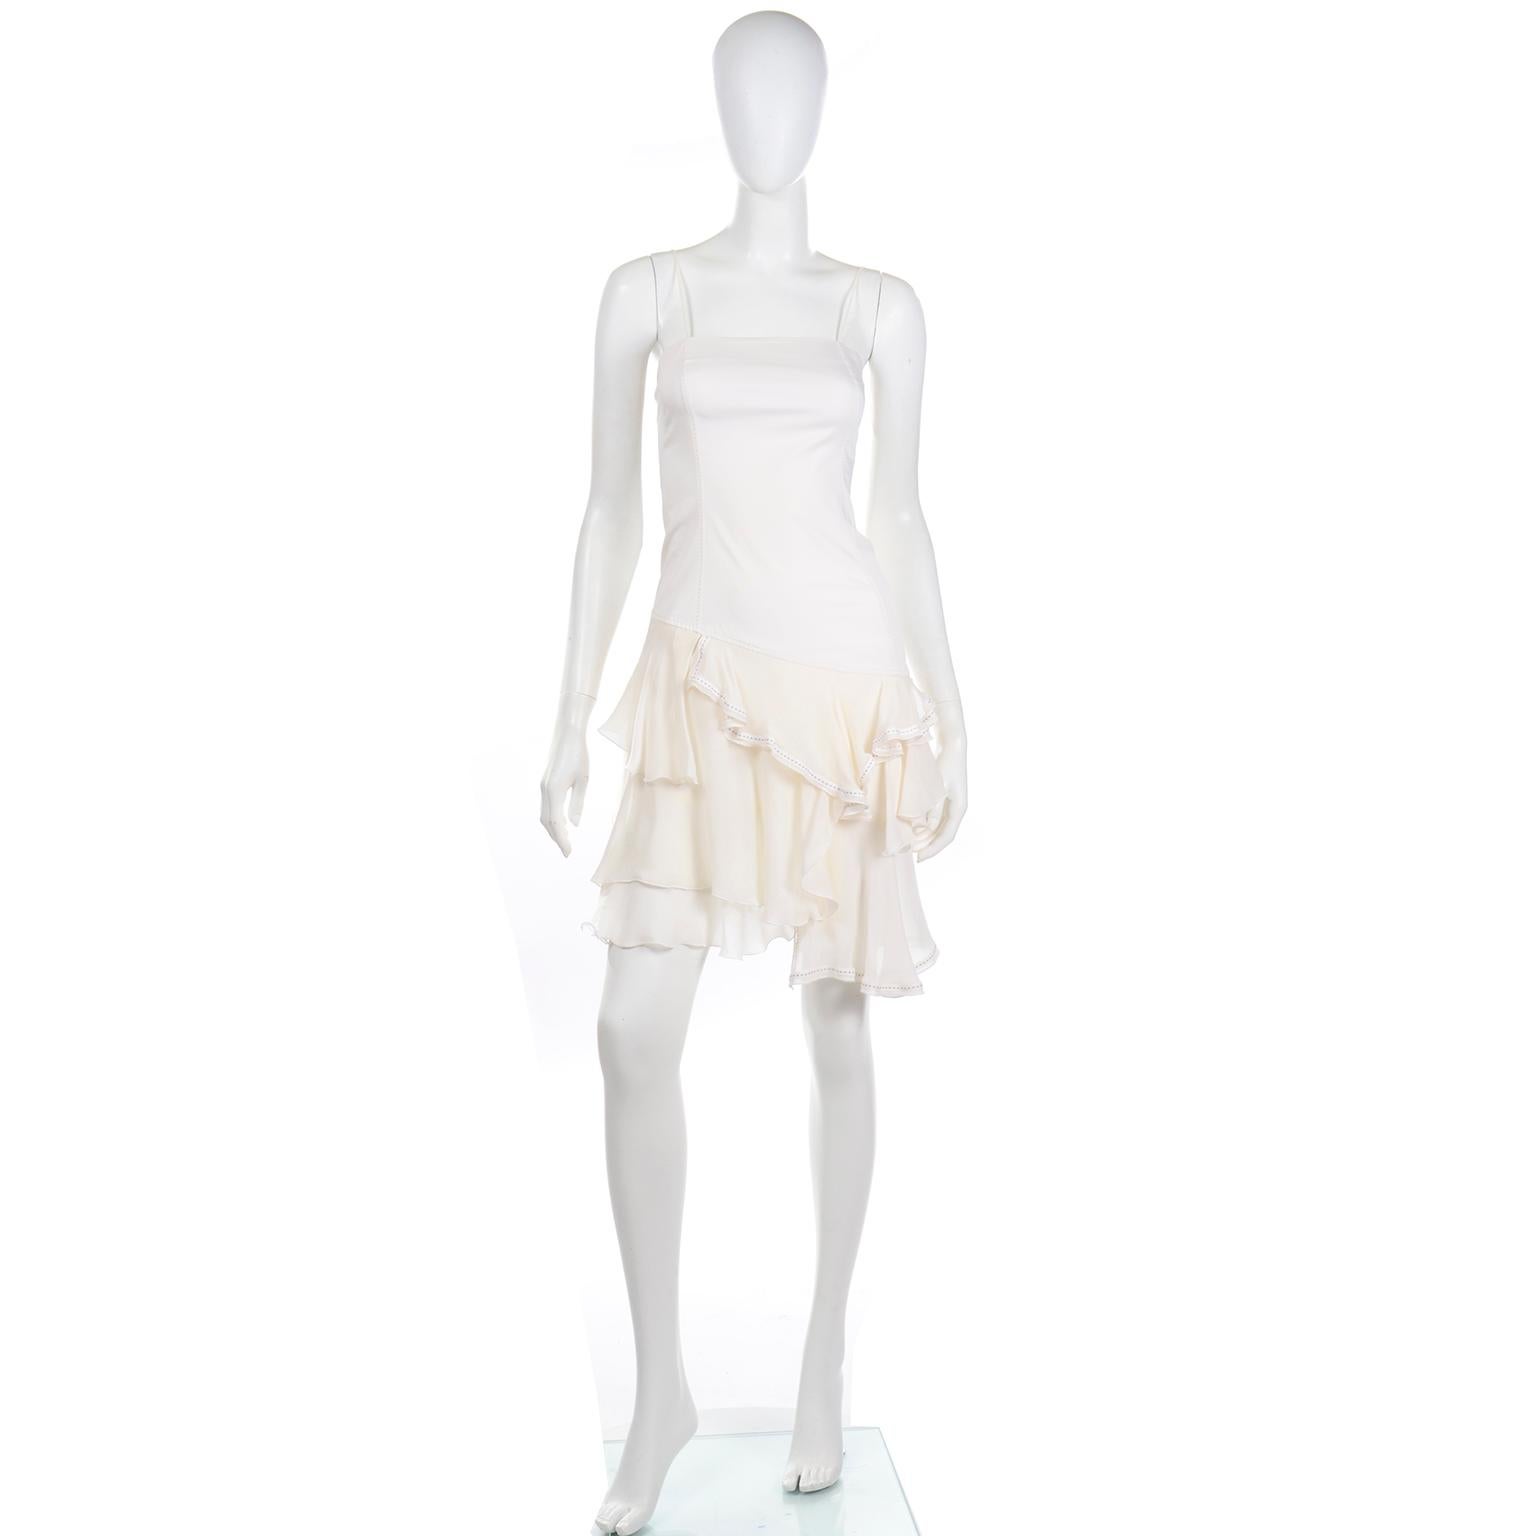 We love vintage Alexander McQueen and he designed this dress for his Spring Summer 1996 collection. This beautiful white dress has a tube fitting bodice with spaghetti straps and fits like a mini dress with attached asymmetrical layered sheer silk